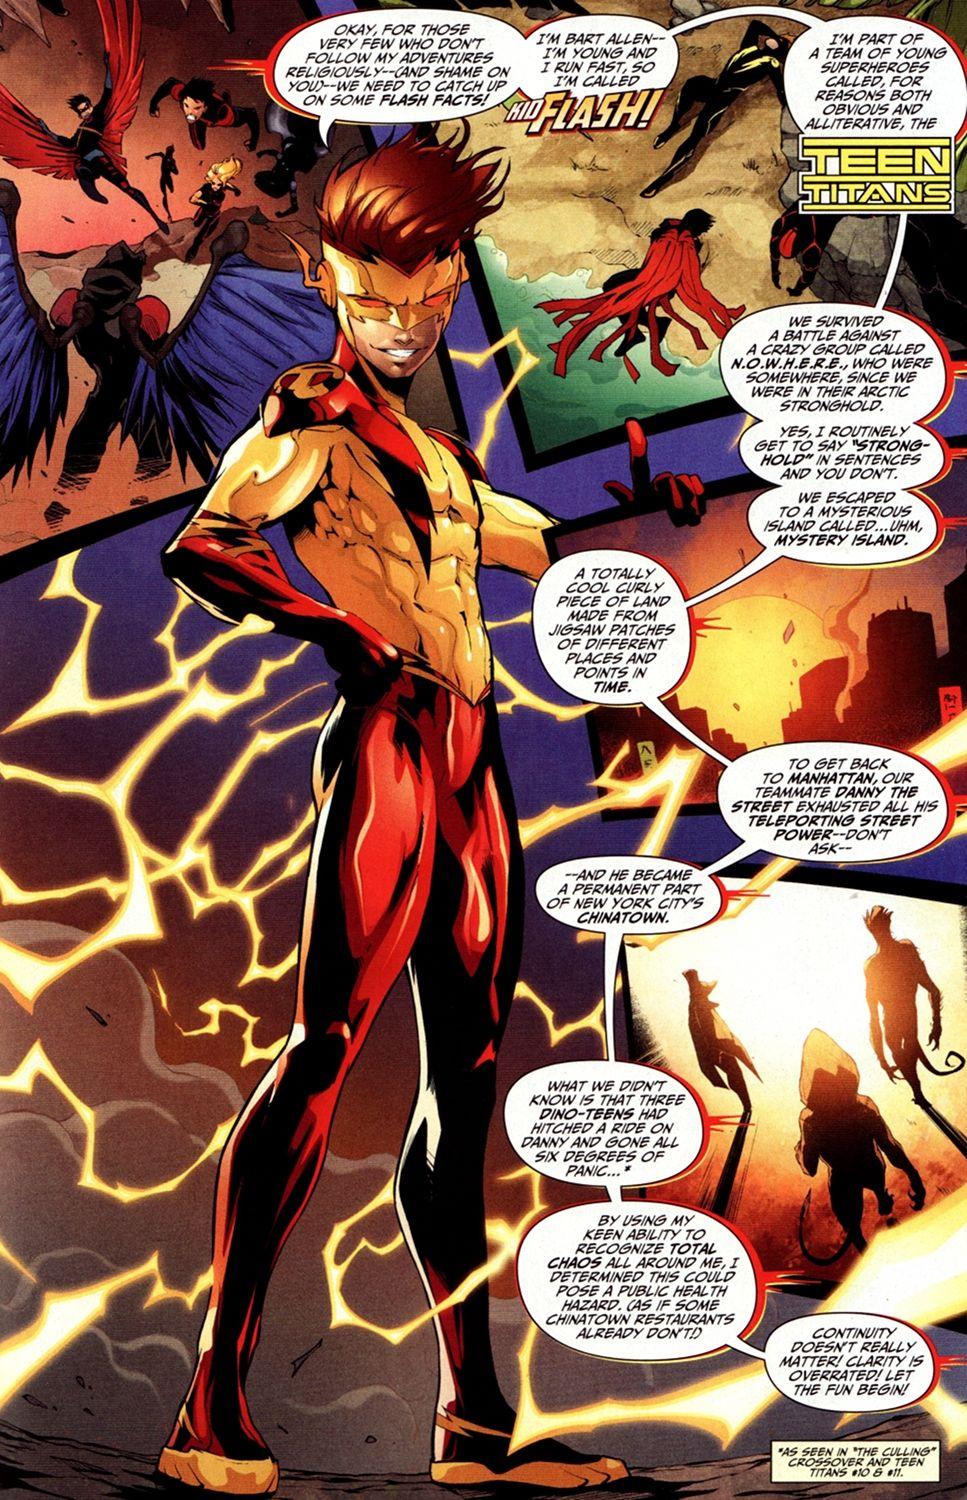 Bart Allen returns as Kid Flash in the New 52! YES! (later -) Except